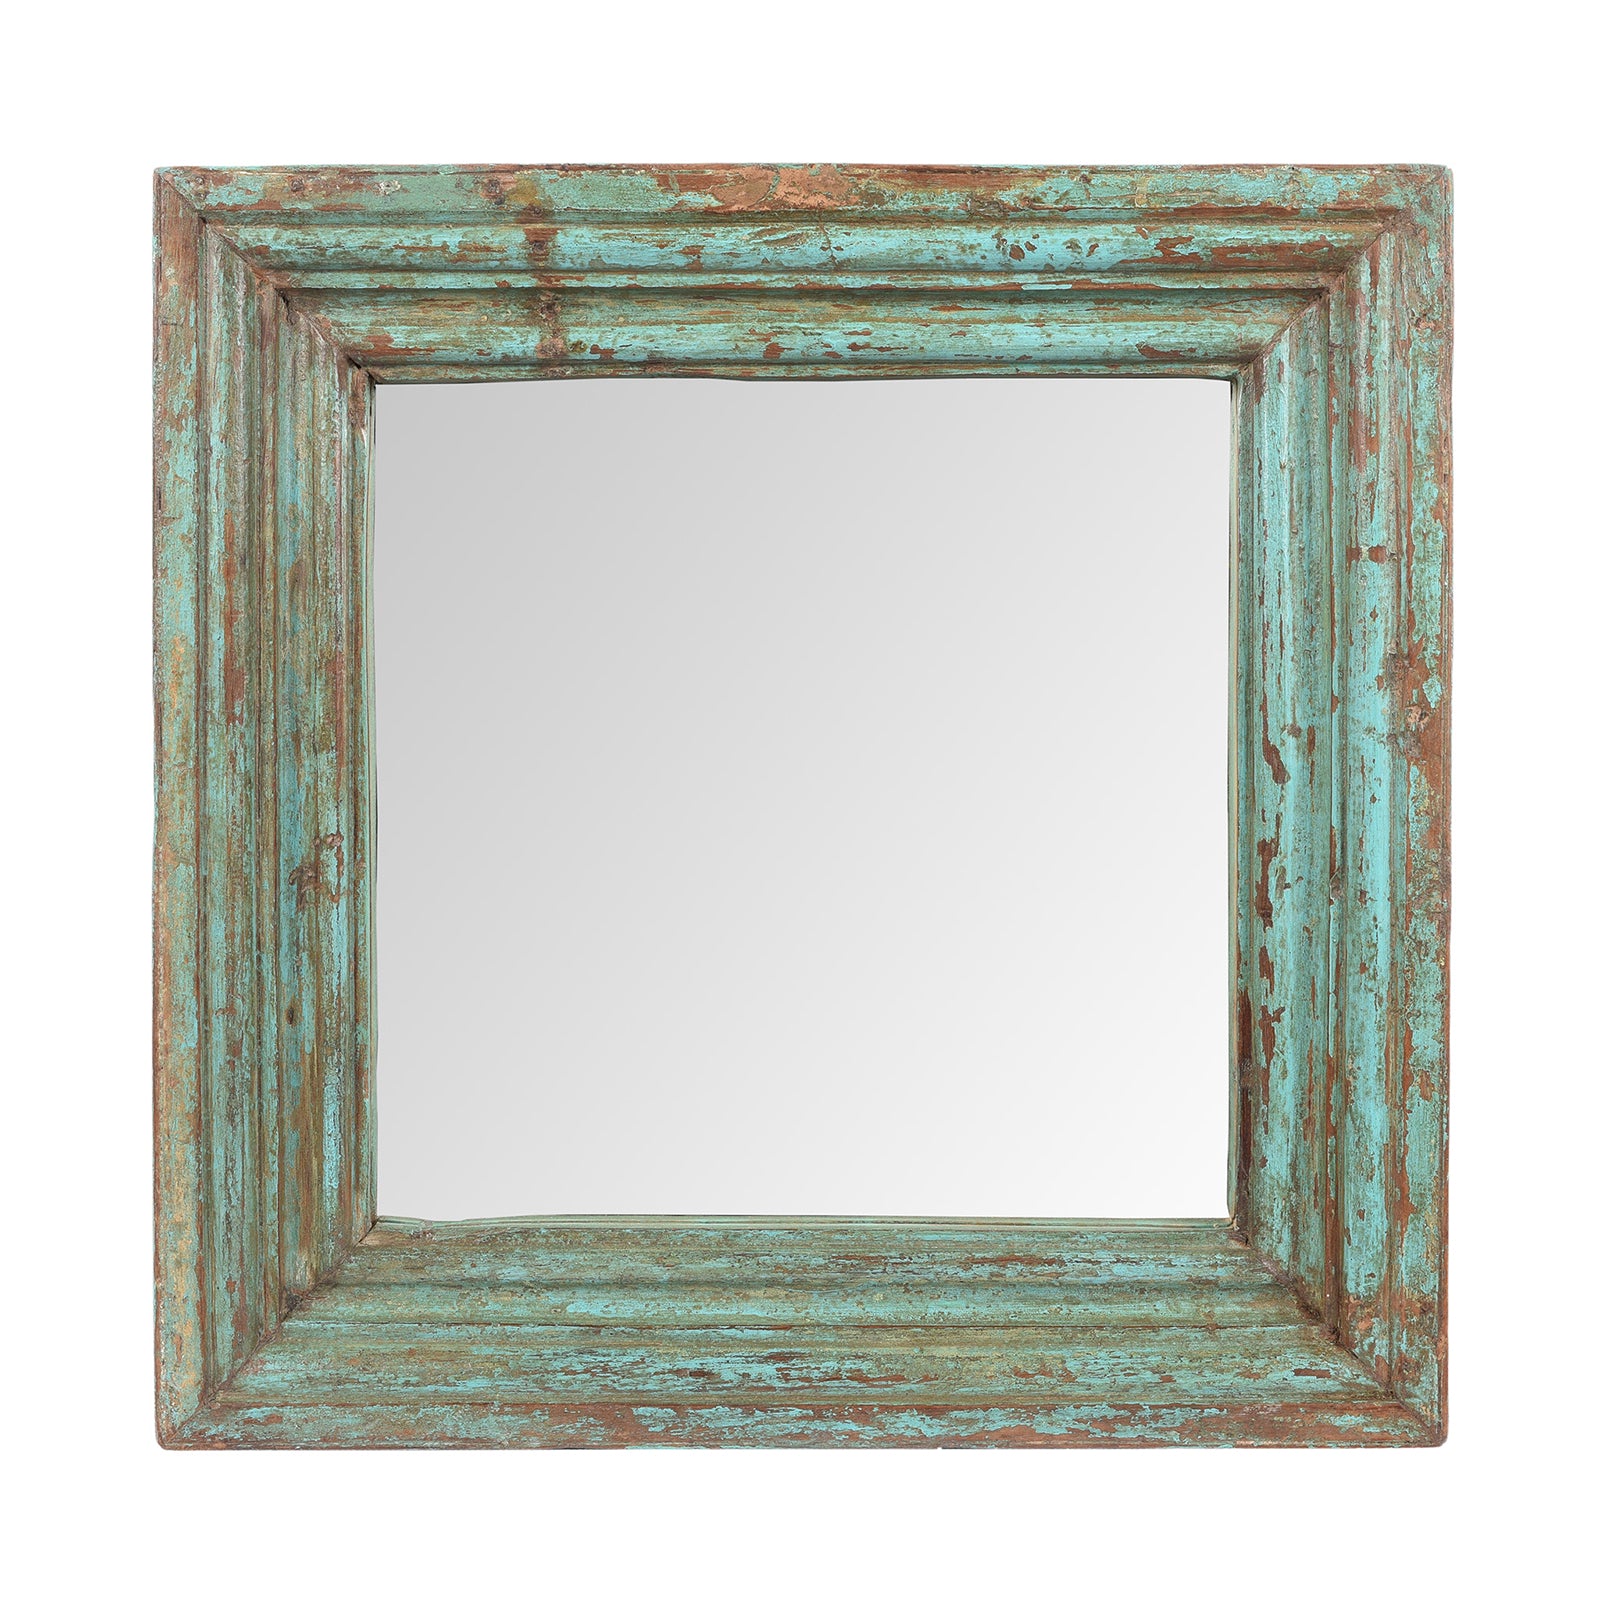 Green Painted Mirror Made From Old Architectural Teak | Indigo Antiques